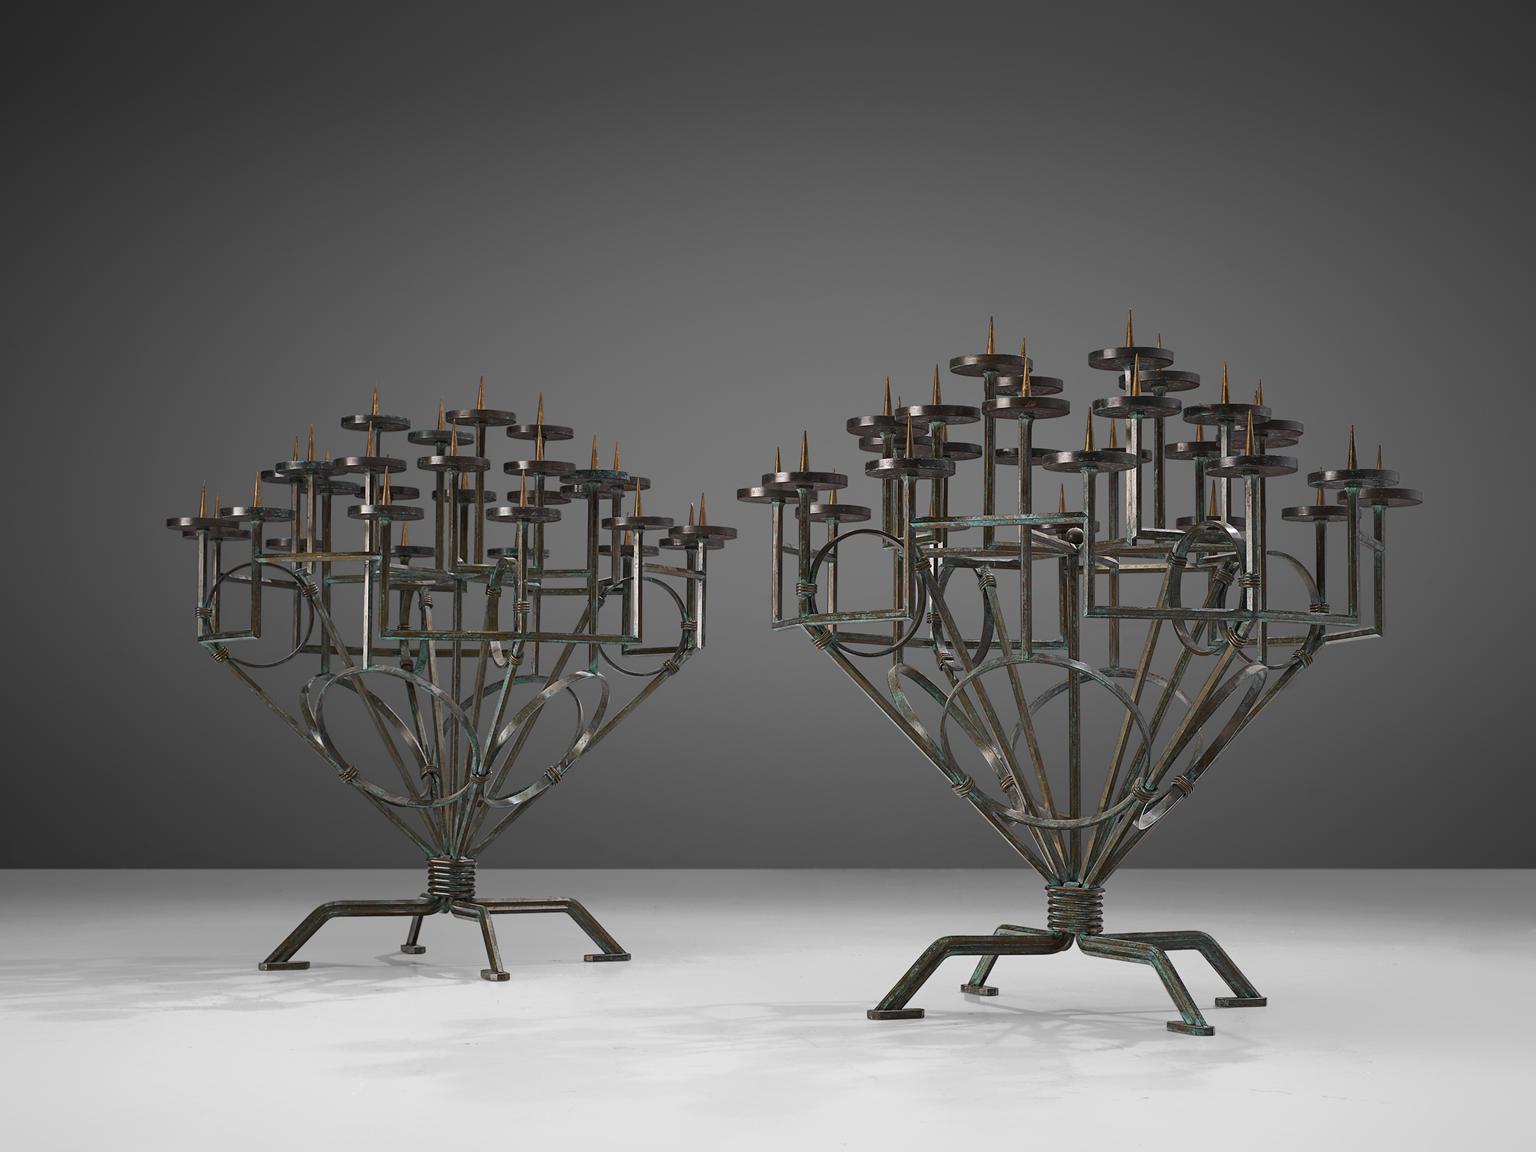 Pair of church candleholders, iron, Europe, early 19th century.

Two exquisite large size candle trees that have probably been housed in a church for many years. These 19th century iron candle holders feature a multi-tiered spread of candle holders